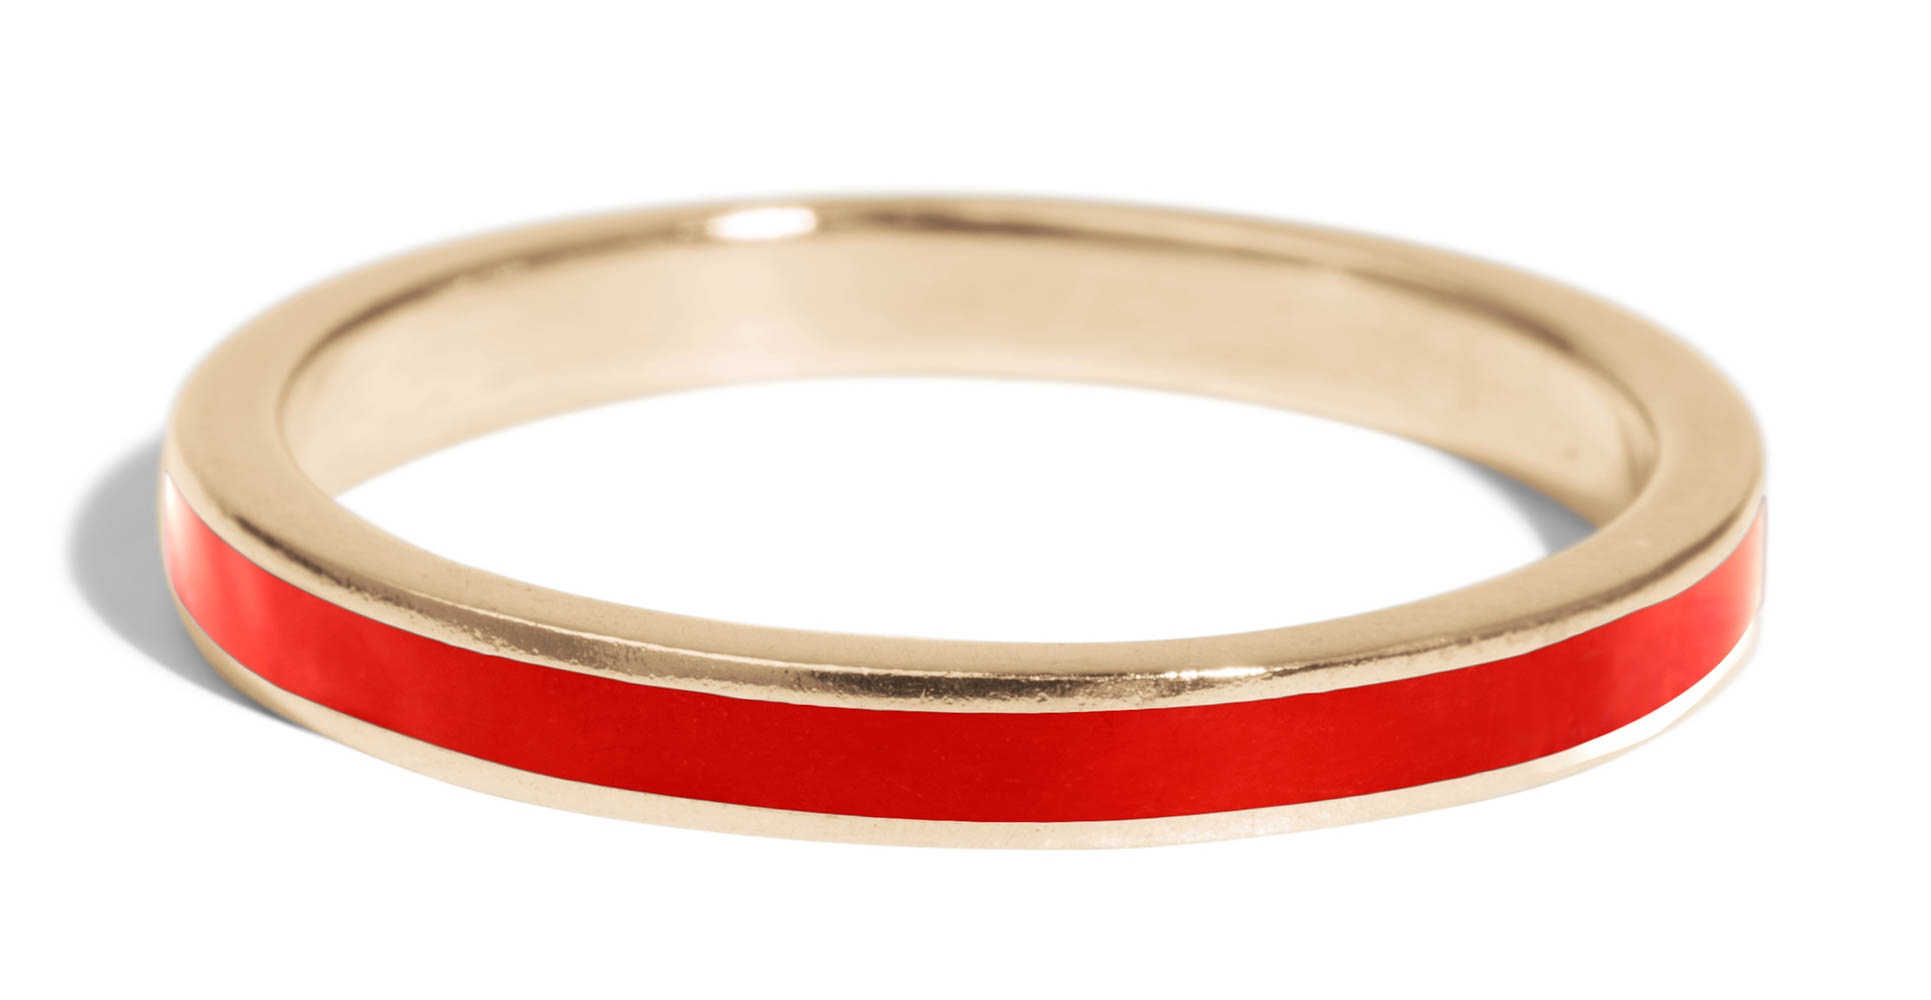 Ray Fringe Edge Band | Ethically Sourced Materials | Handcrafted Fine Jewelry | Bario Neal